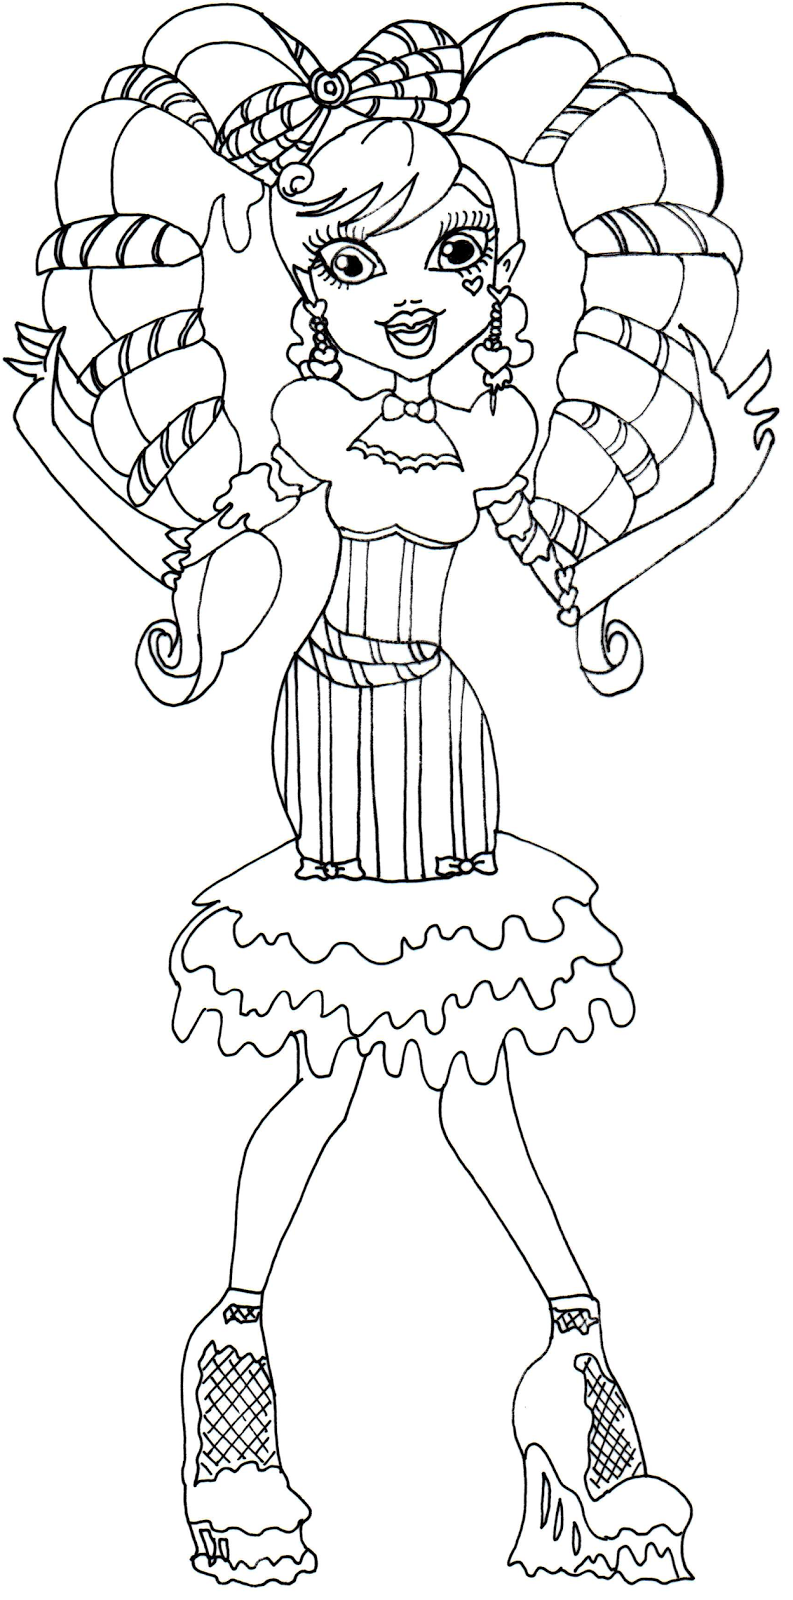 Download Free Printable Monster High Coloring Pages: Draculaura Sweet Screams Monster High Coloring Page